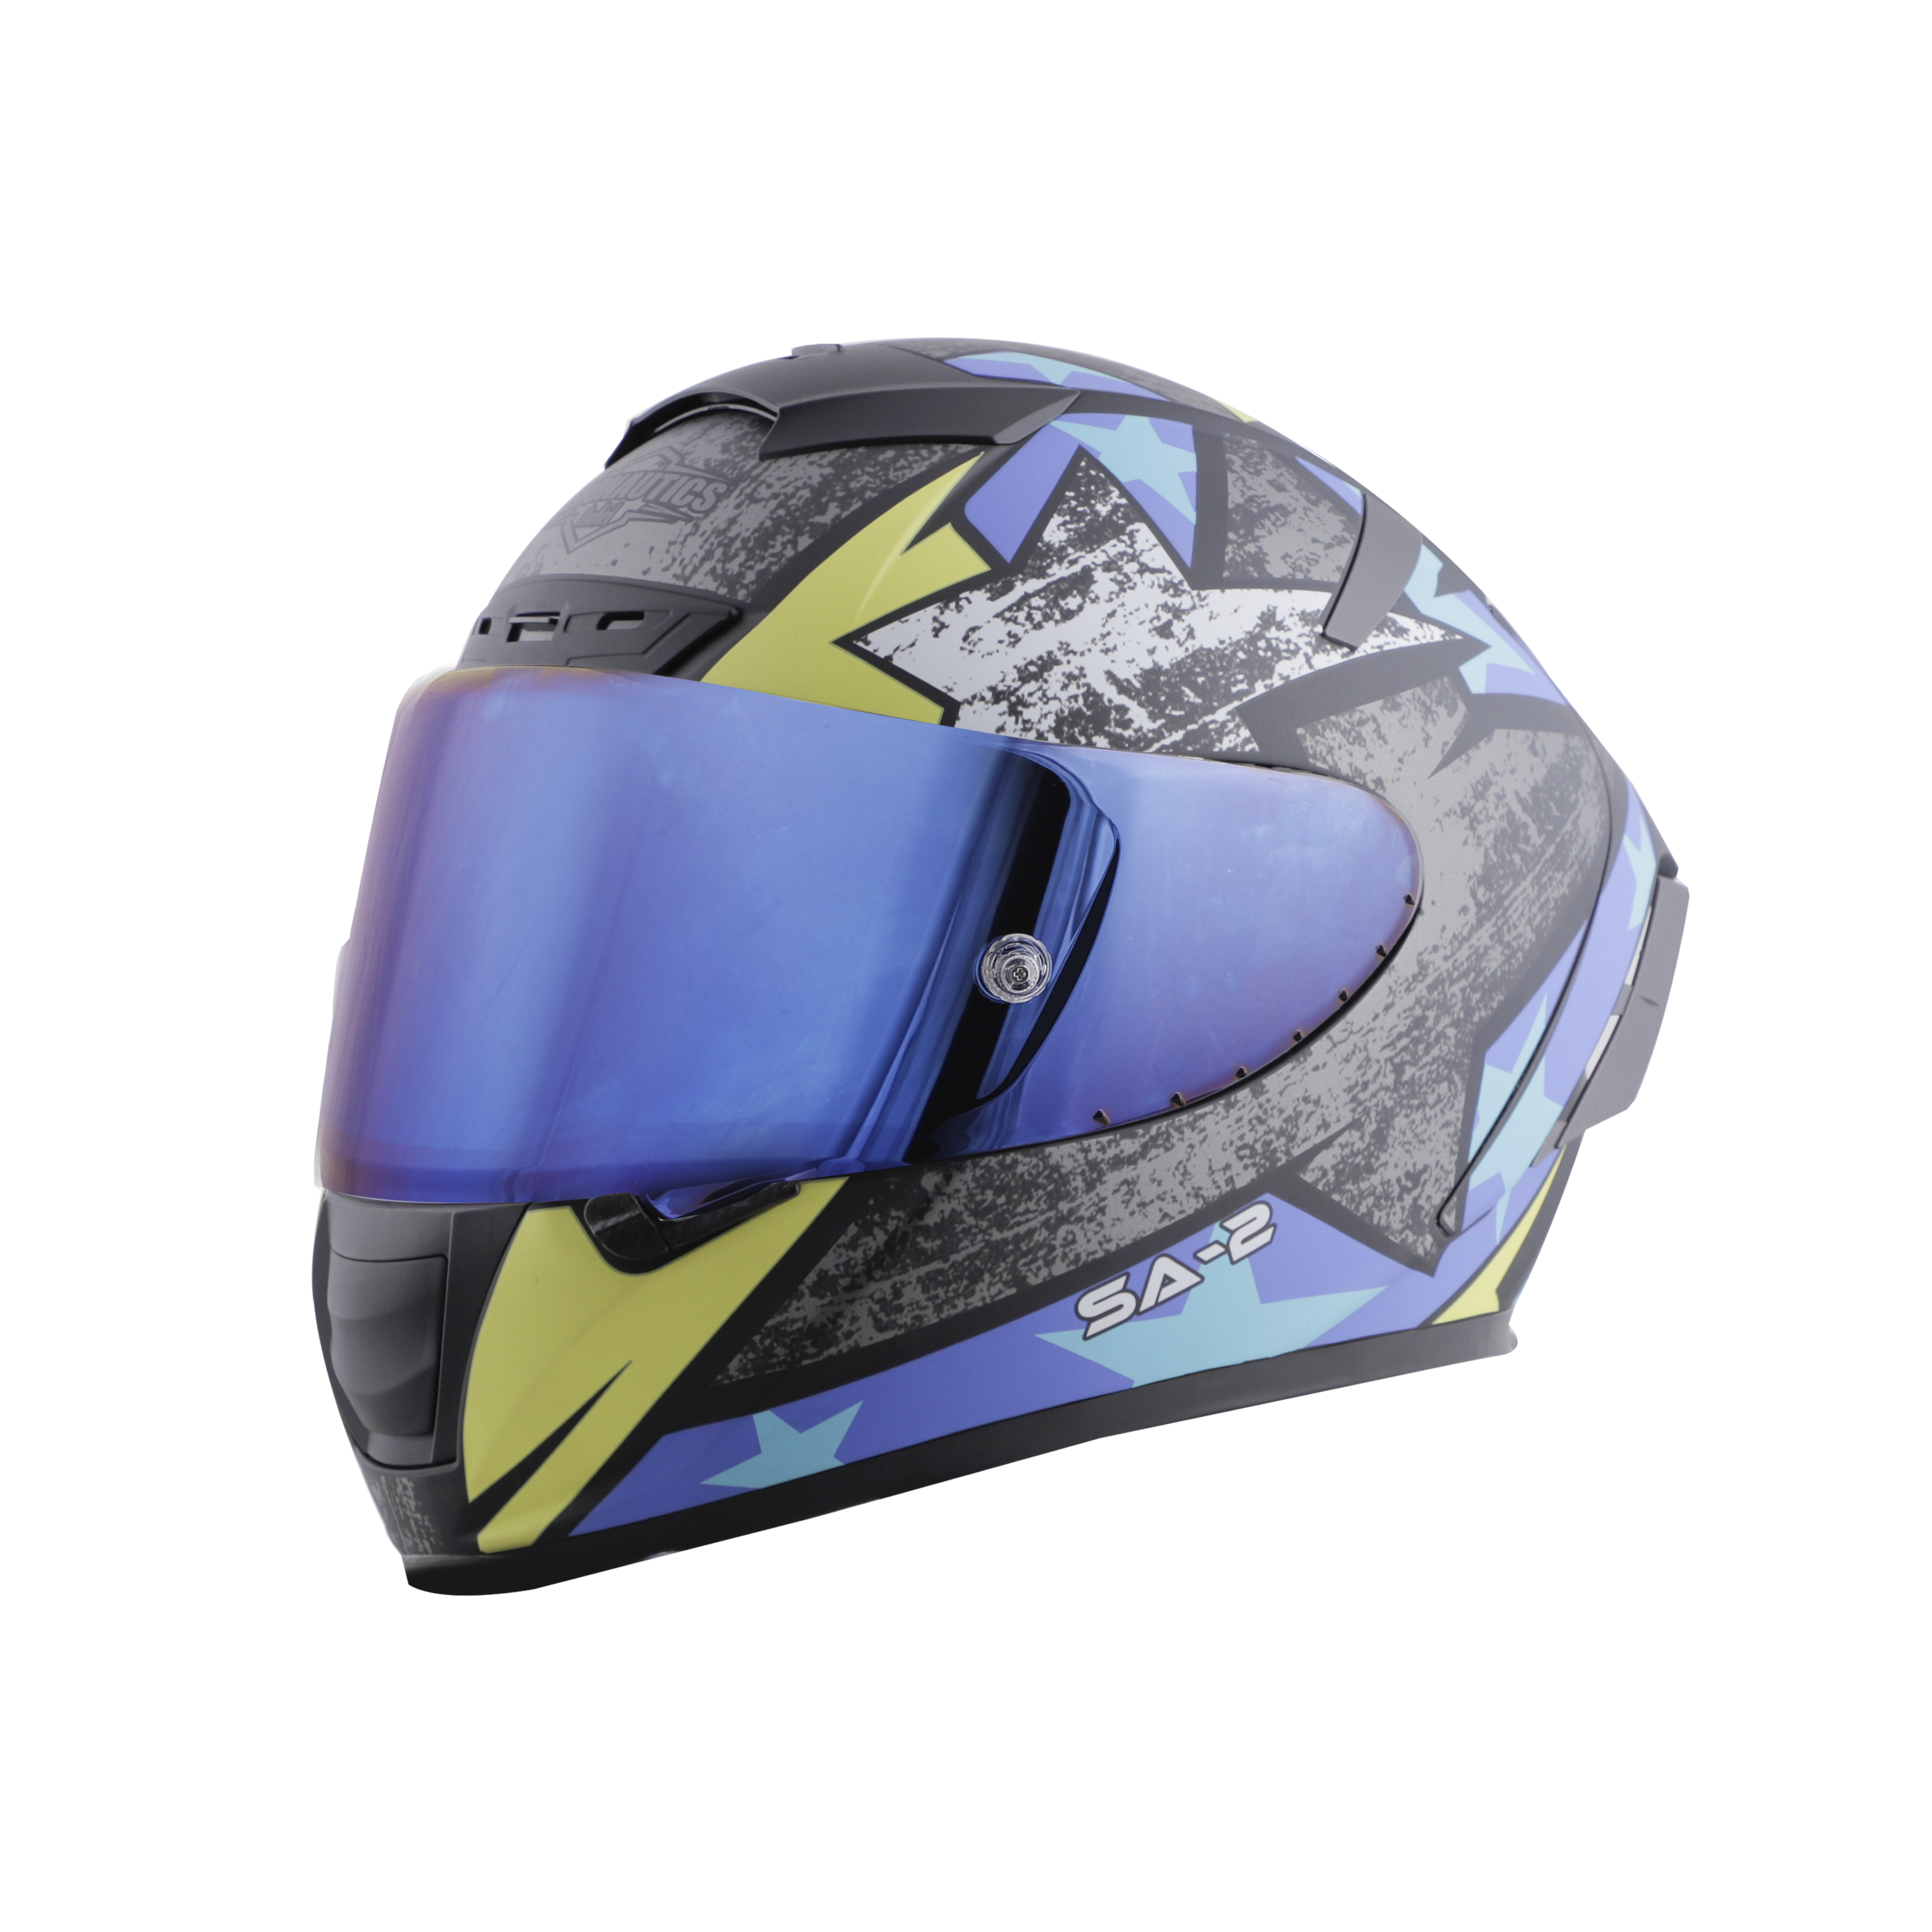 SA-2 STAR GLOSSY BLACK WITH GREY FITTED WITH CLEAR VISOR CHROME BLUE VISOR FREE (WITH ANTI-FOG SHIELD HOLDER)